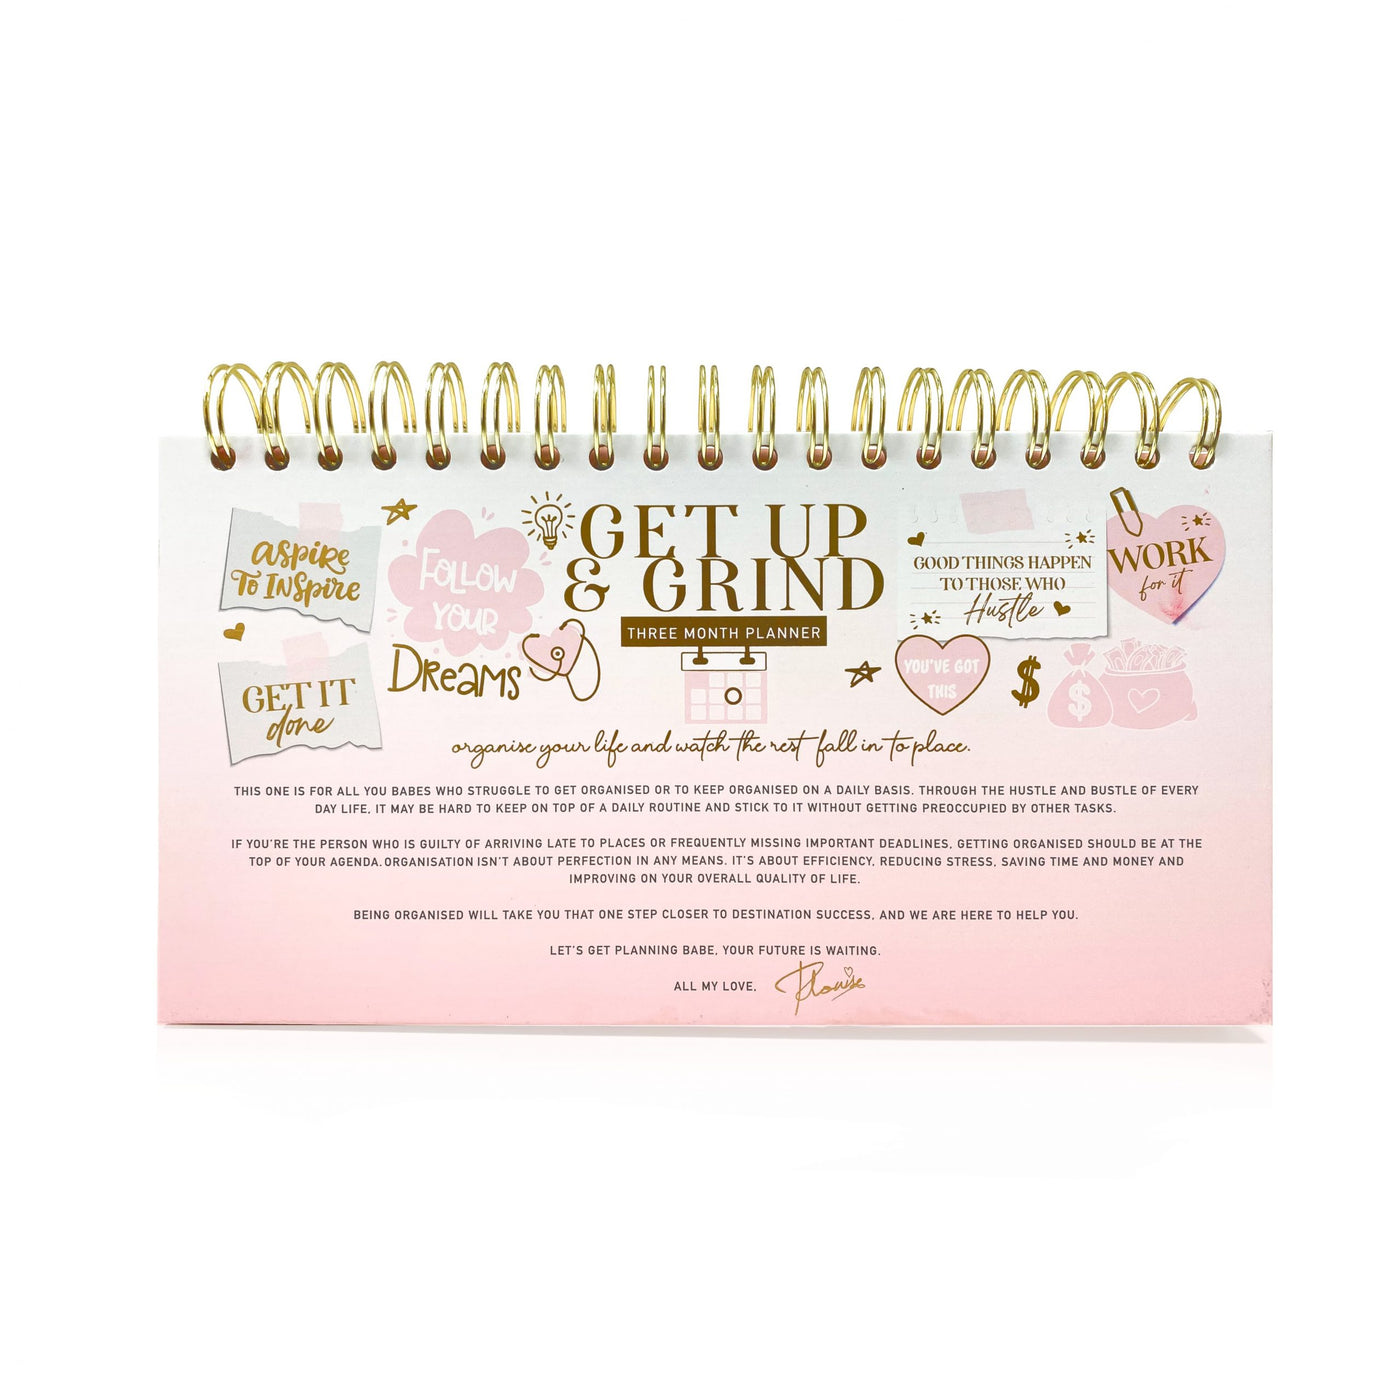 P.Louise - Get Up and Grind Three Month Planner